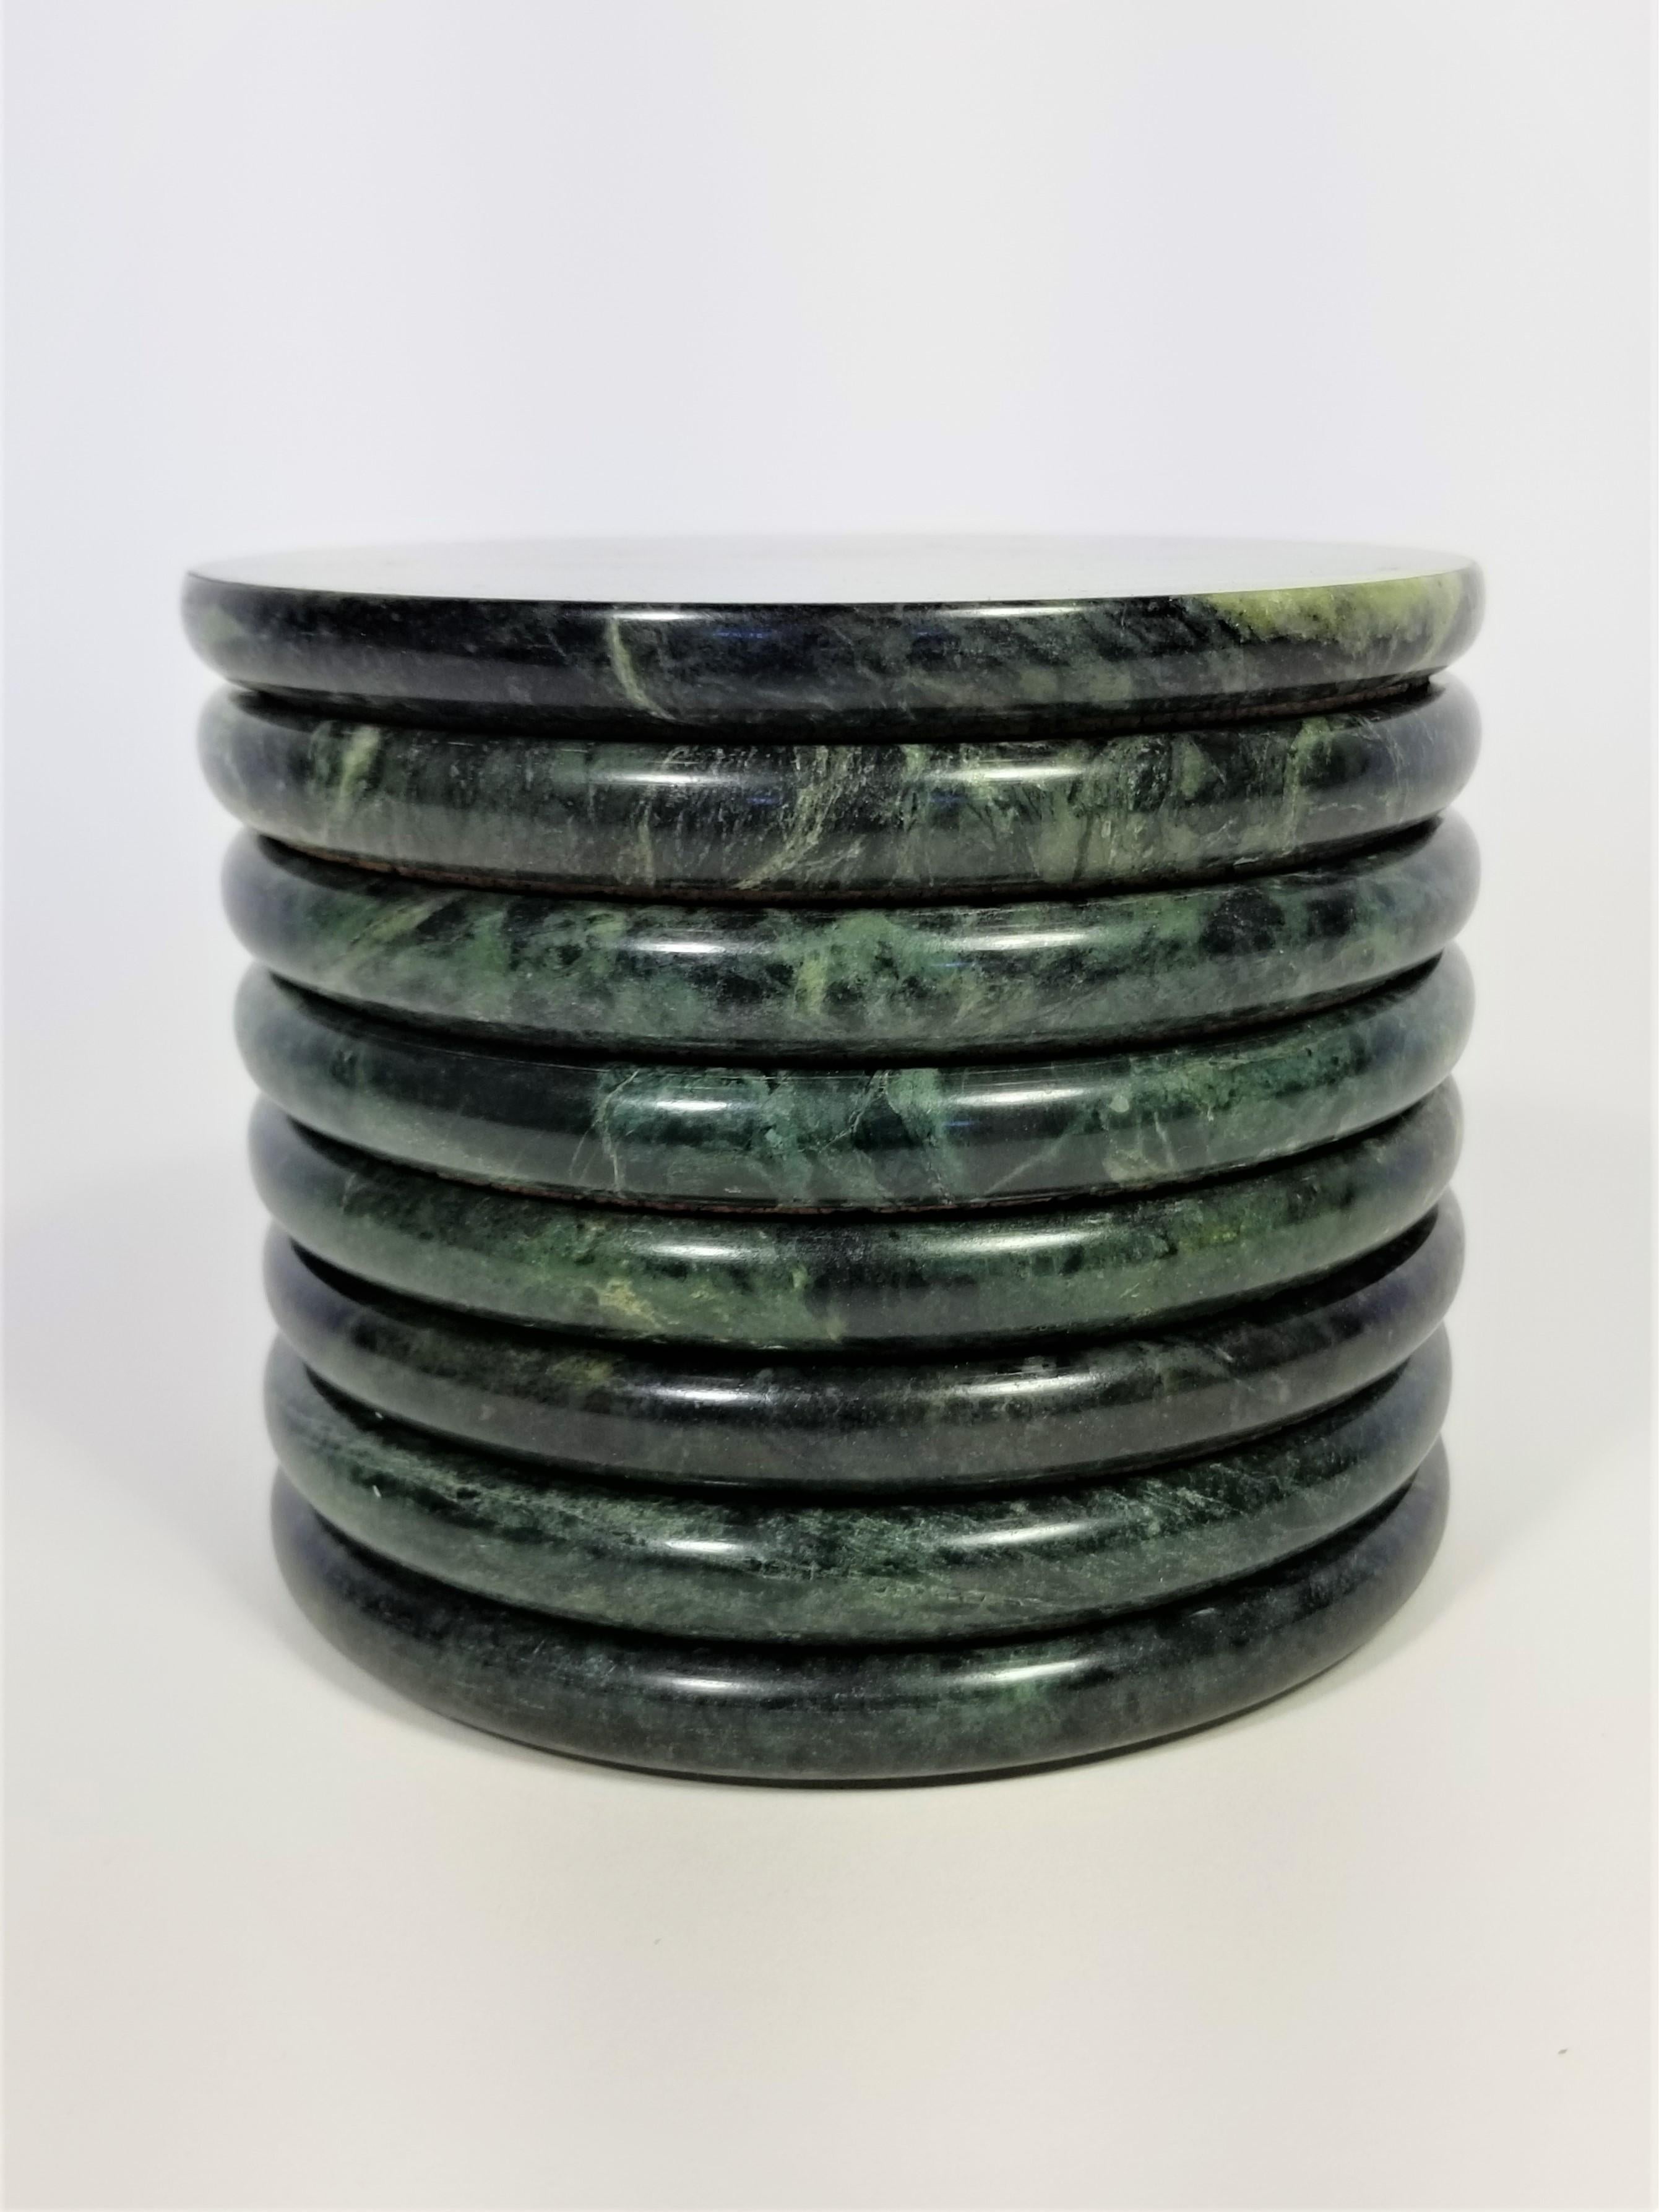 Gorgeous set of 8 vintage midcentury green marble coasters. Cork protective bottom. Marble is in excellent condition and cork bottoms exhibit minor wear consistent with age and use.